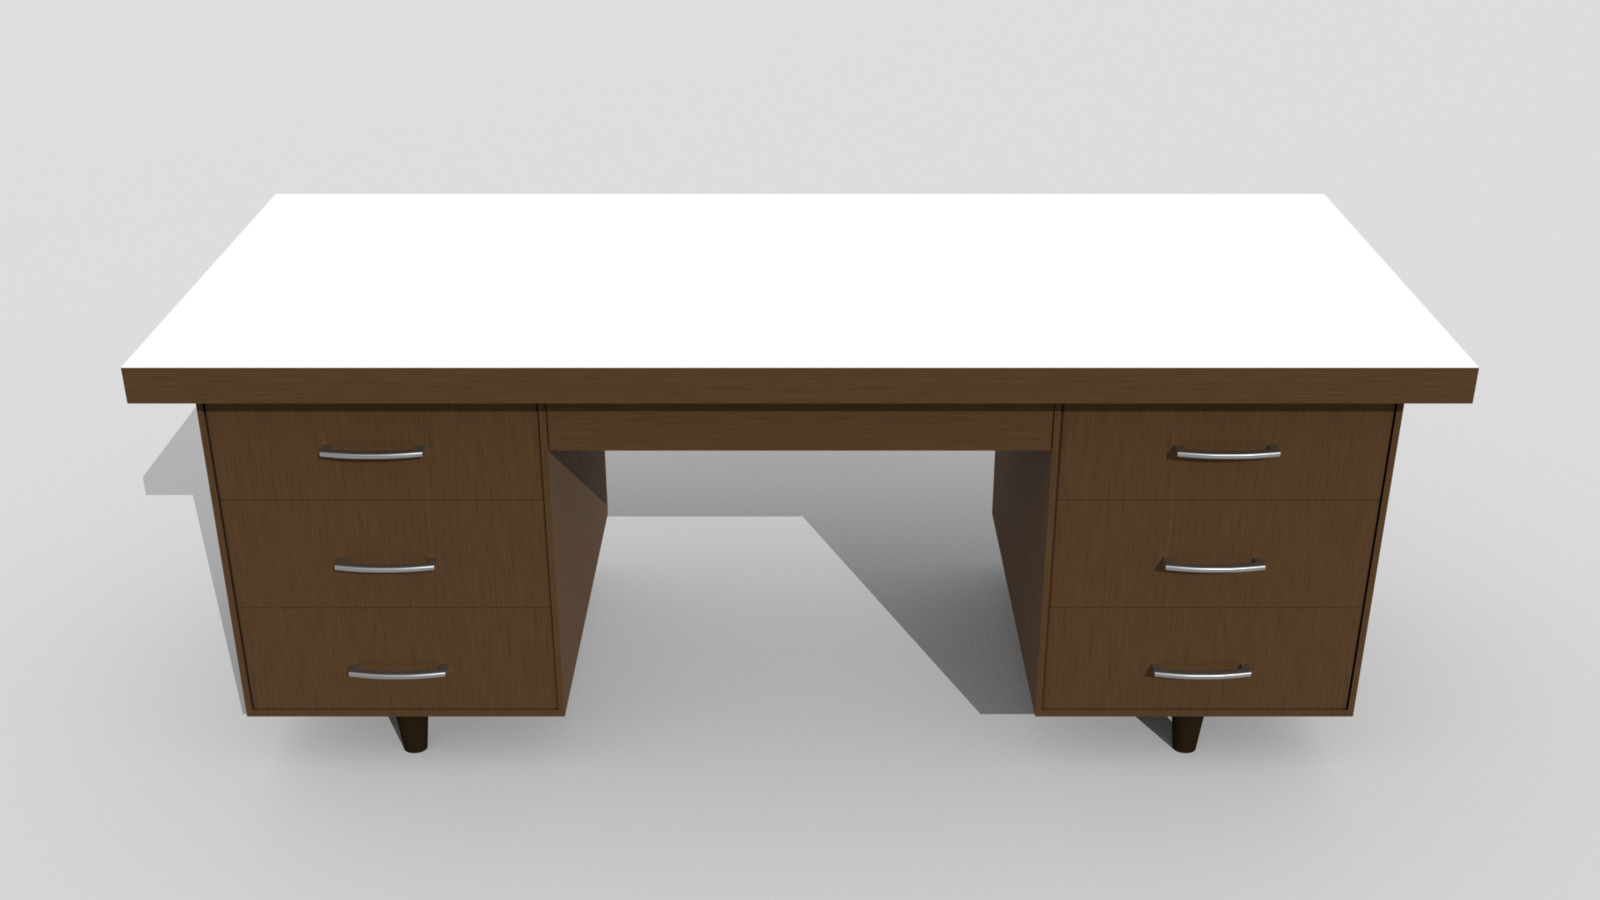 Front angled view of the desk.